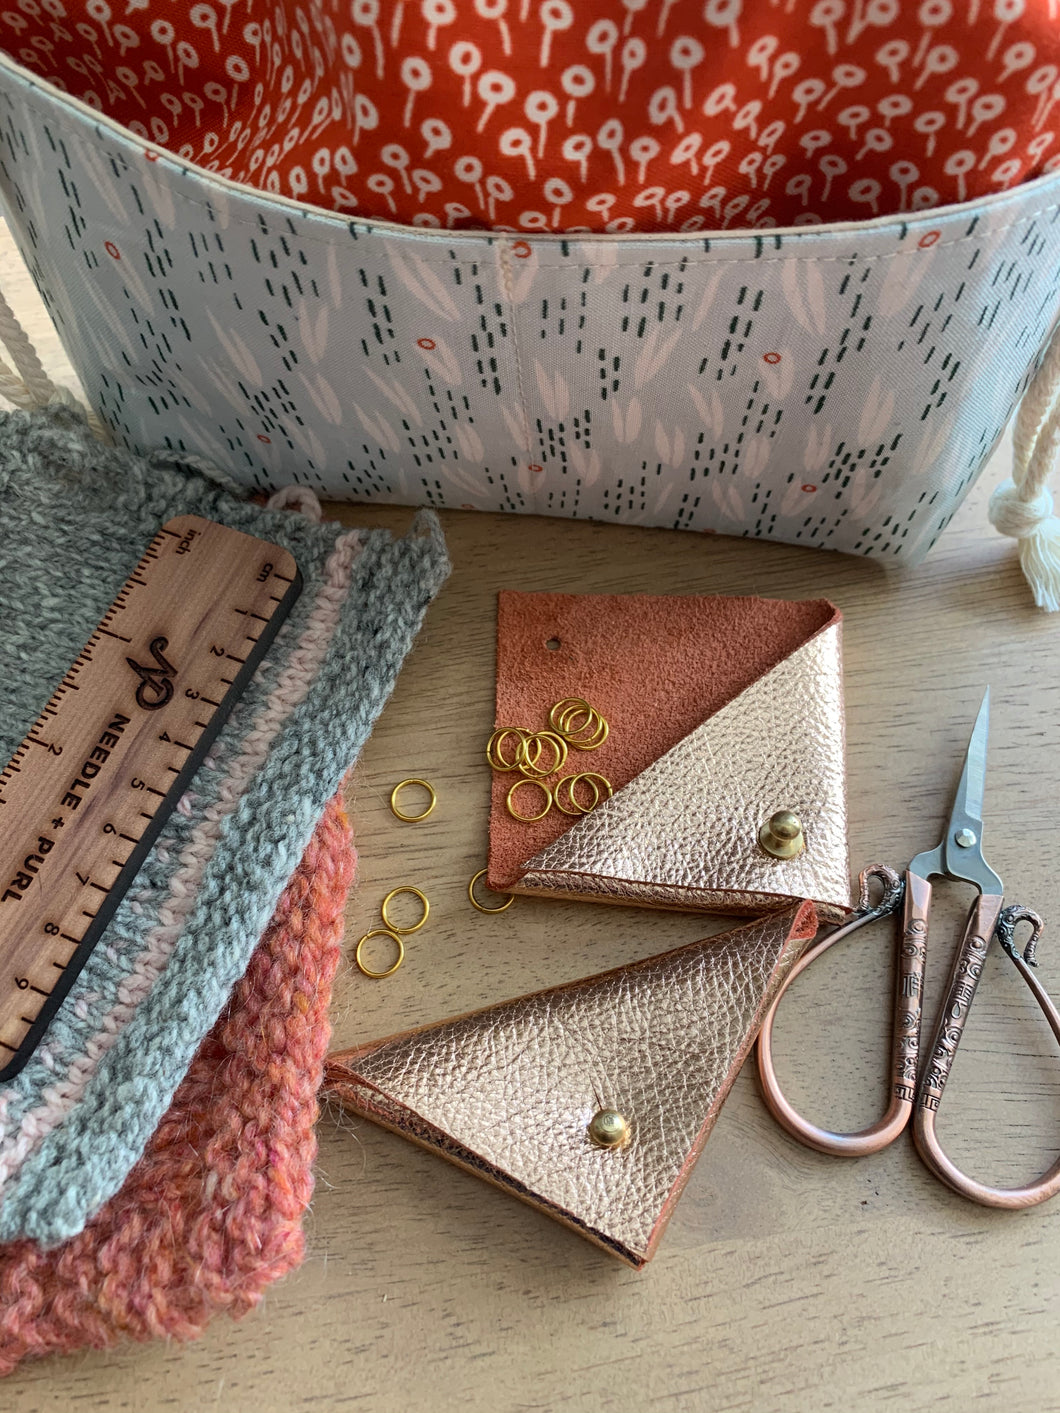 Two rose gold leather triangular stitch marker pouches lie on a table next to knit swatches, rose gold scissors, and a fabric Praktical project bag. One pouch is open and gold stitch markers spill out onto the table.